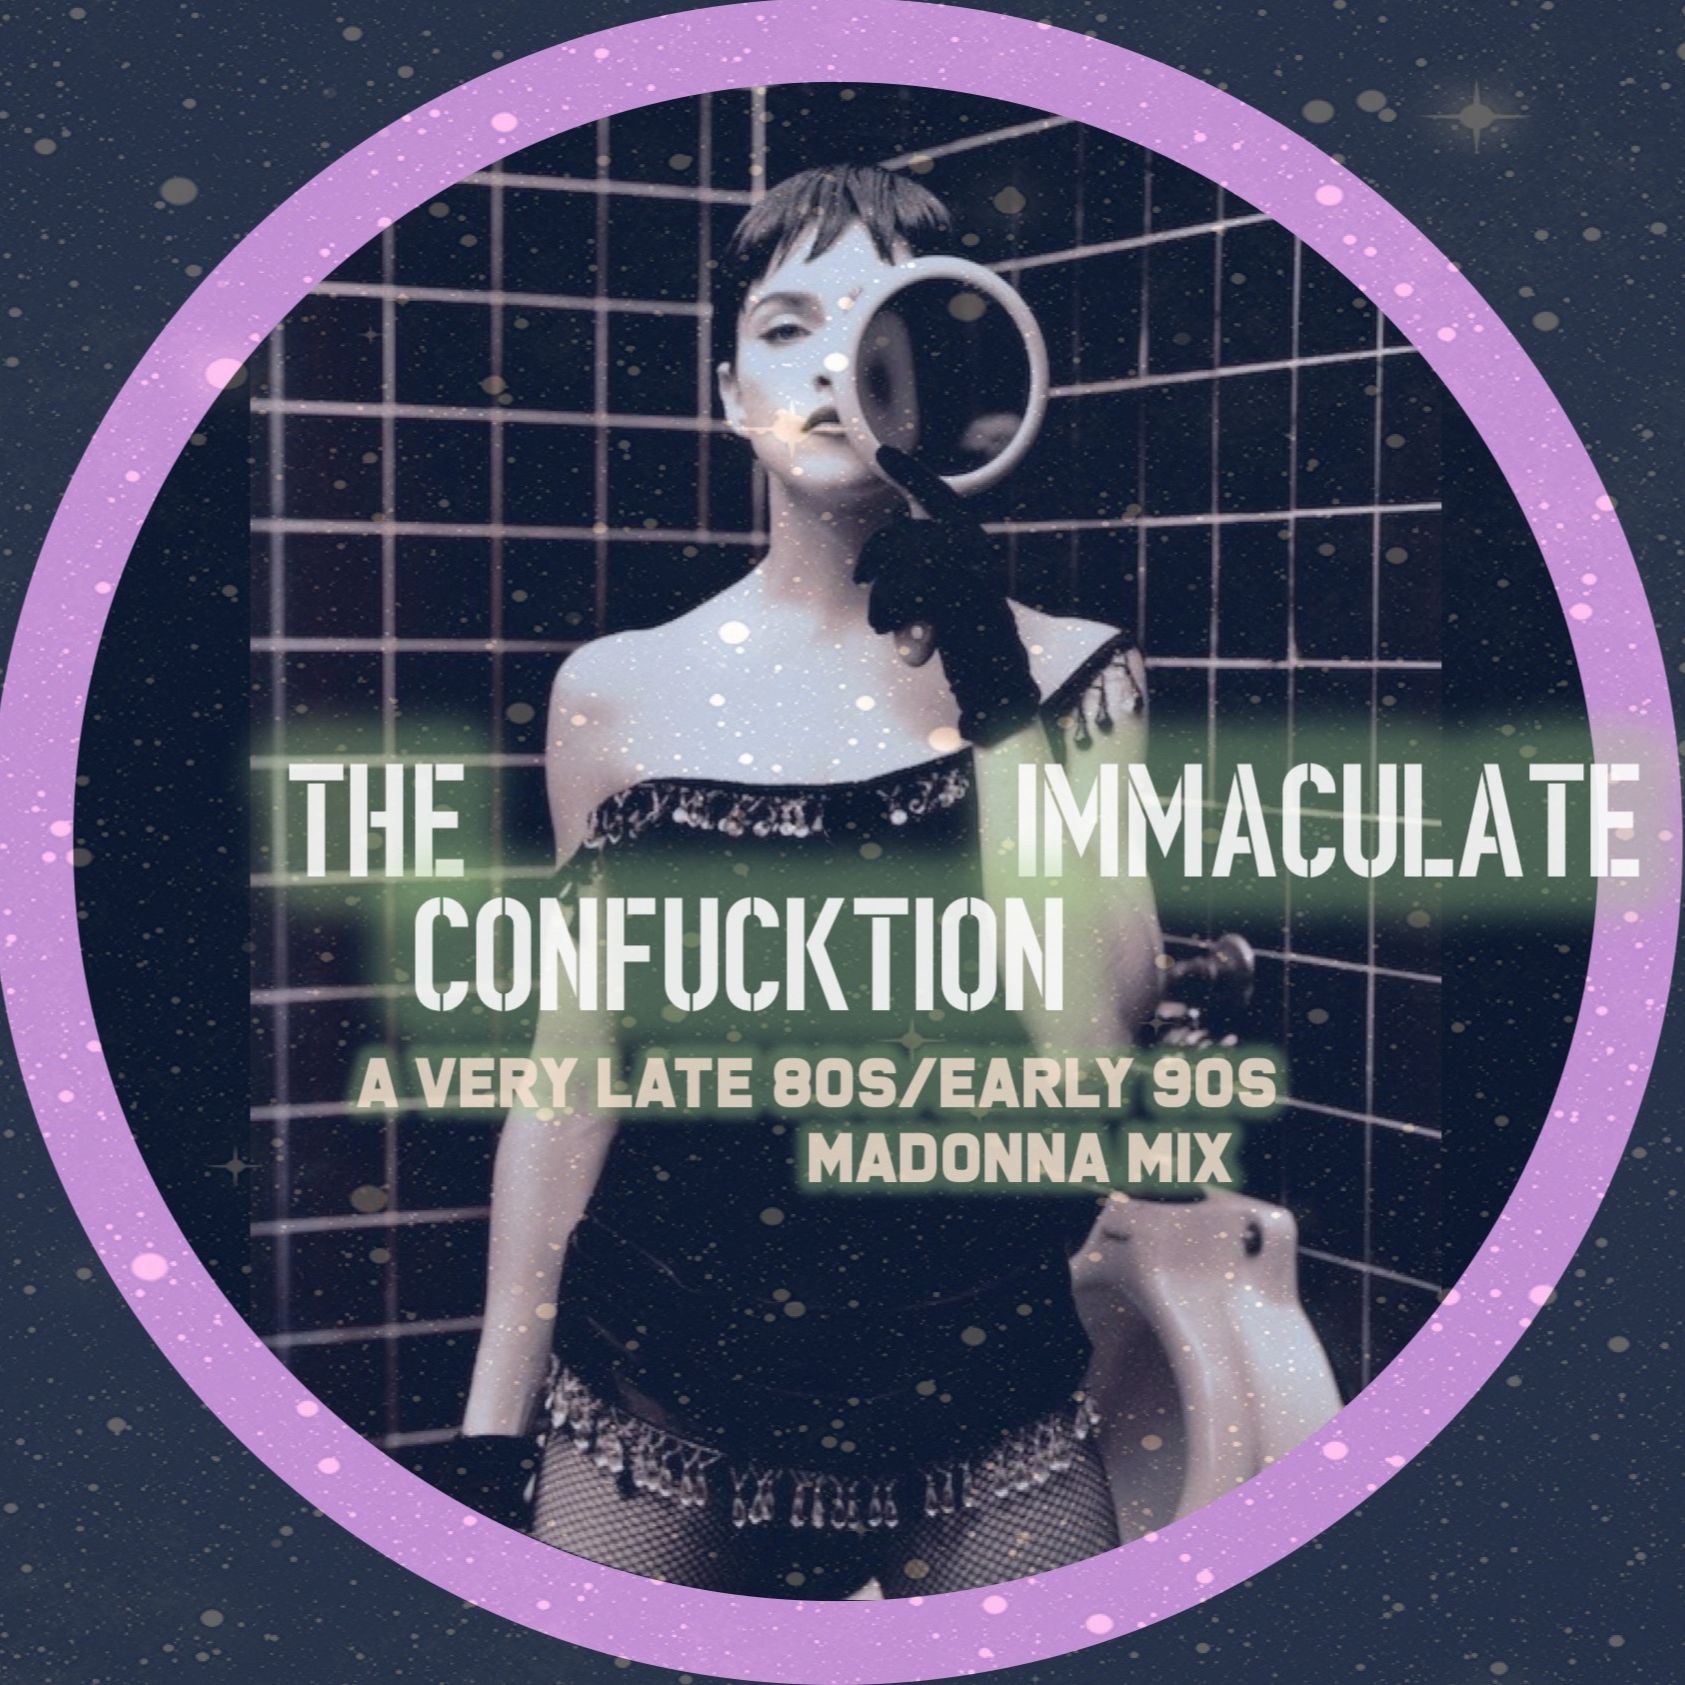 The Immaculate Confucktion - a very late 80s/early 90s Madonna Mix